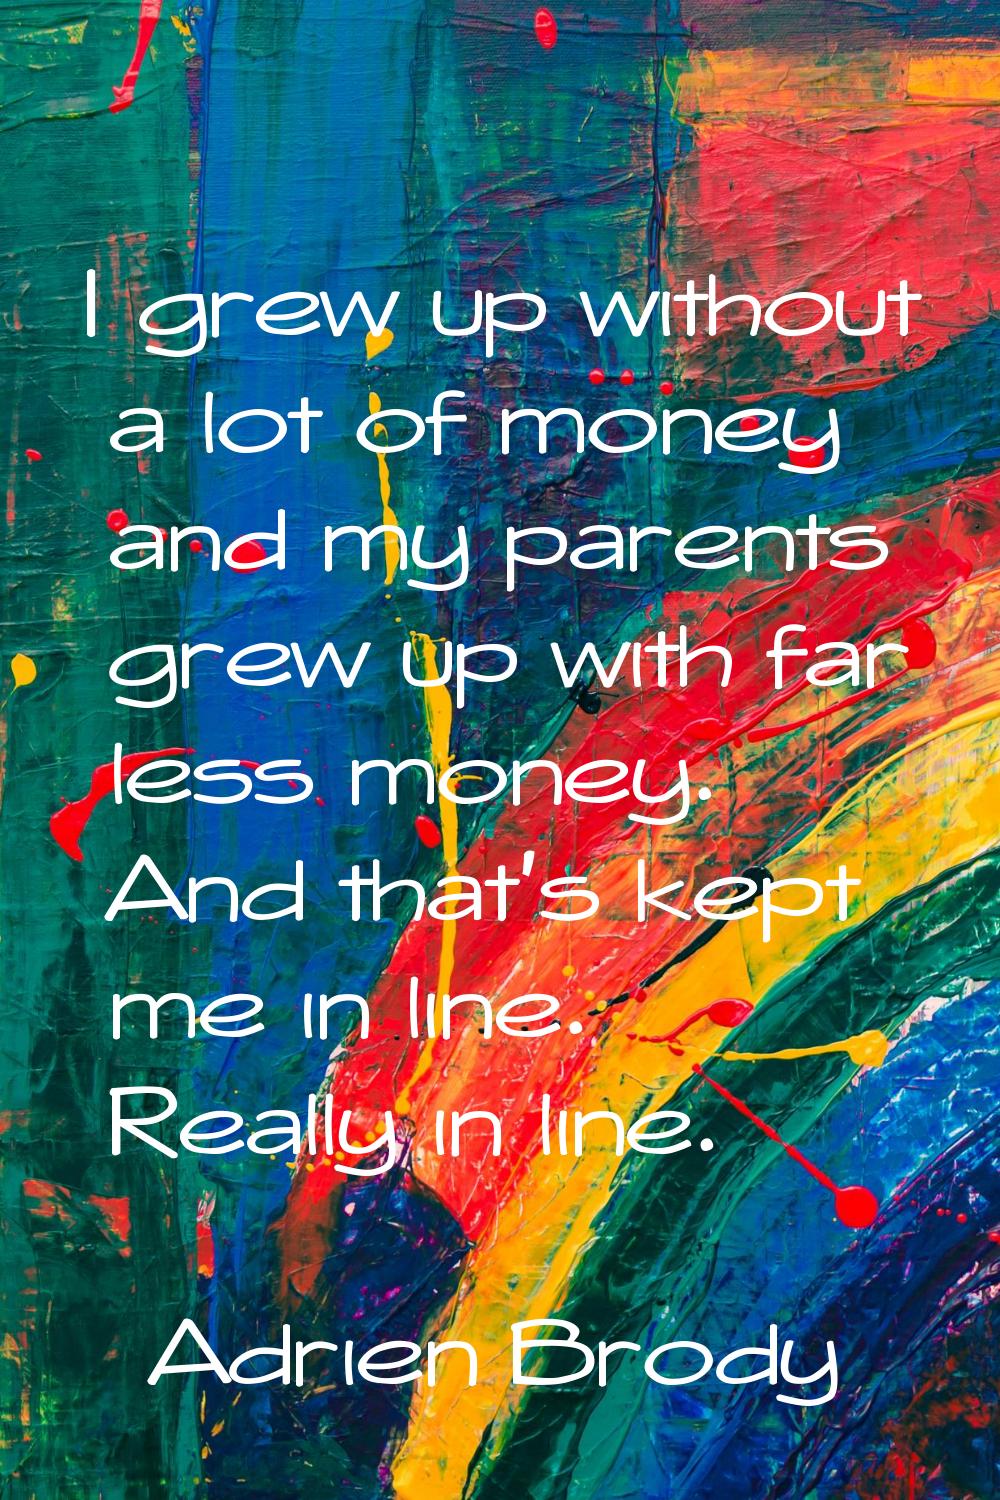 I grew up without a lot of money and my parents grew up with far less money. And that's kept me in 